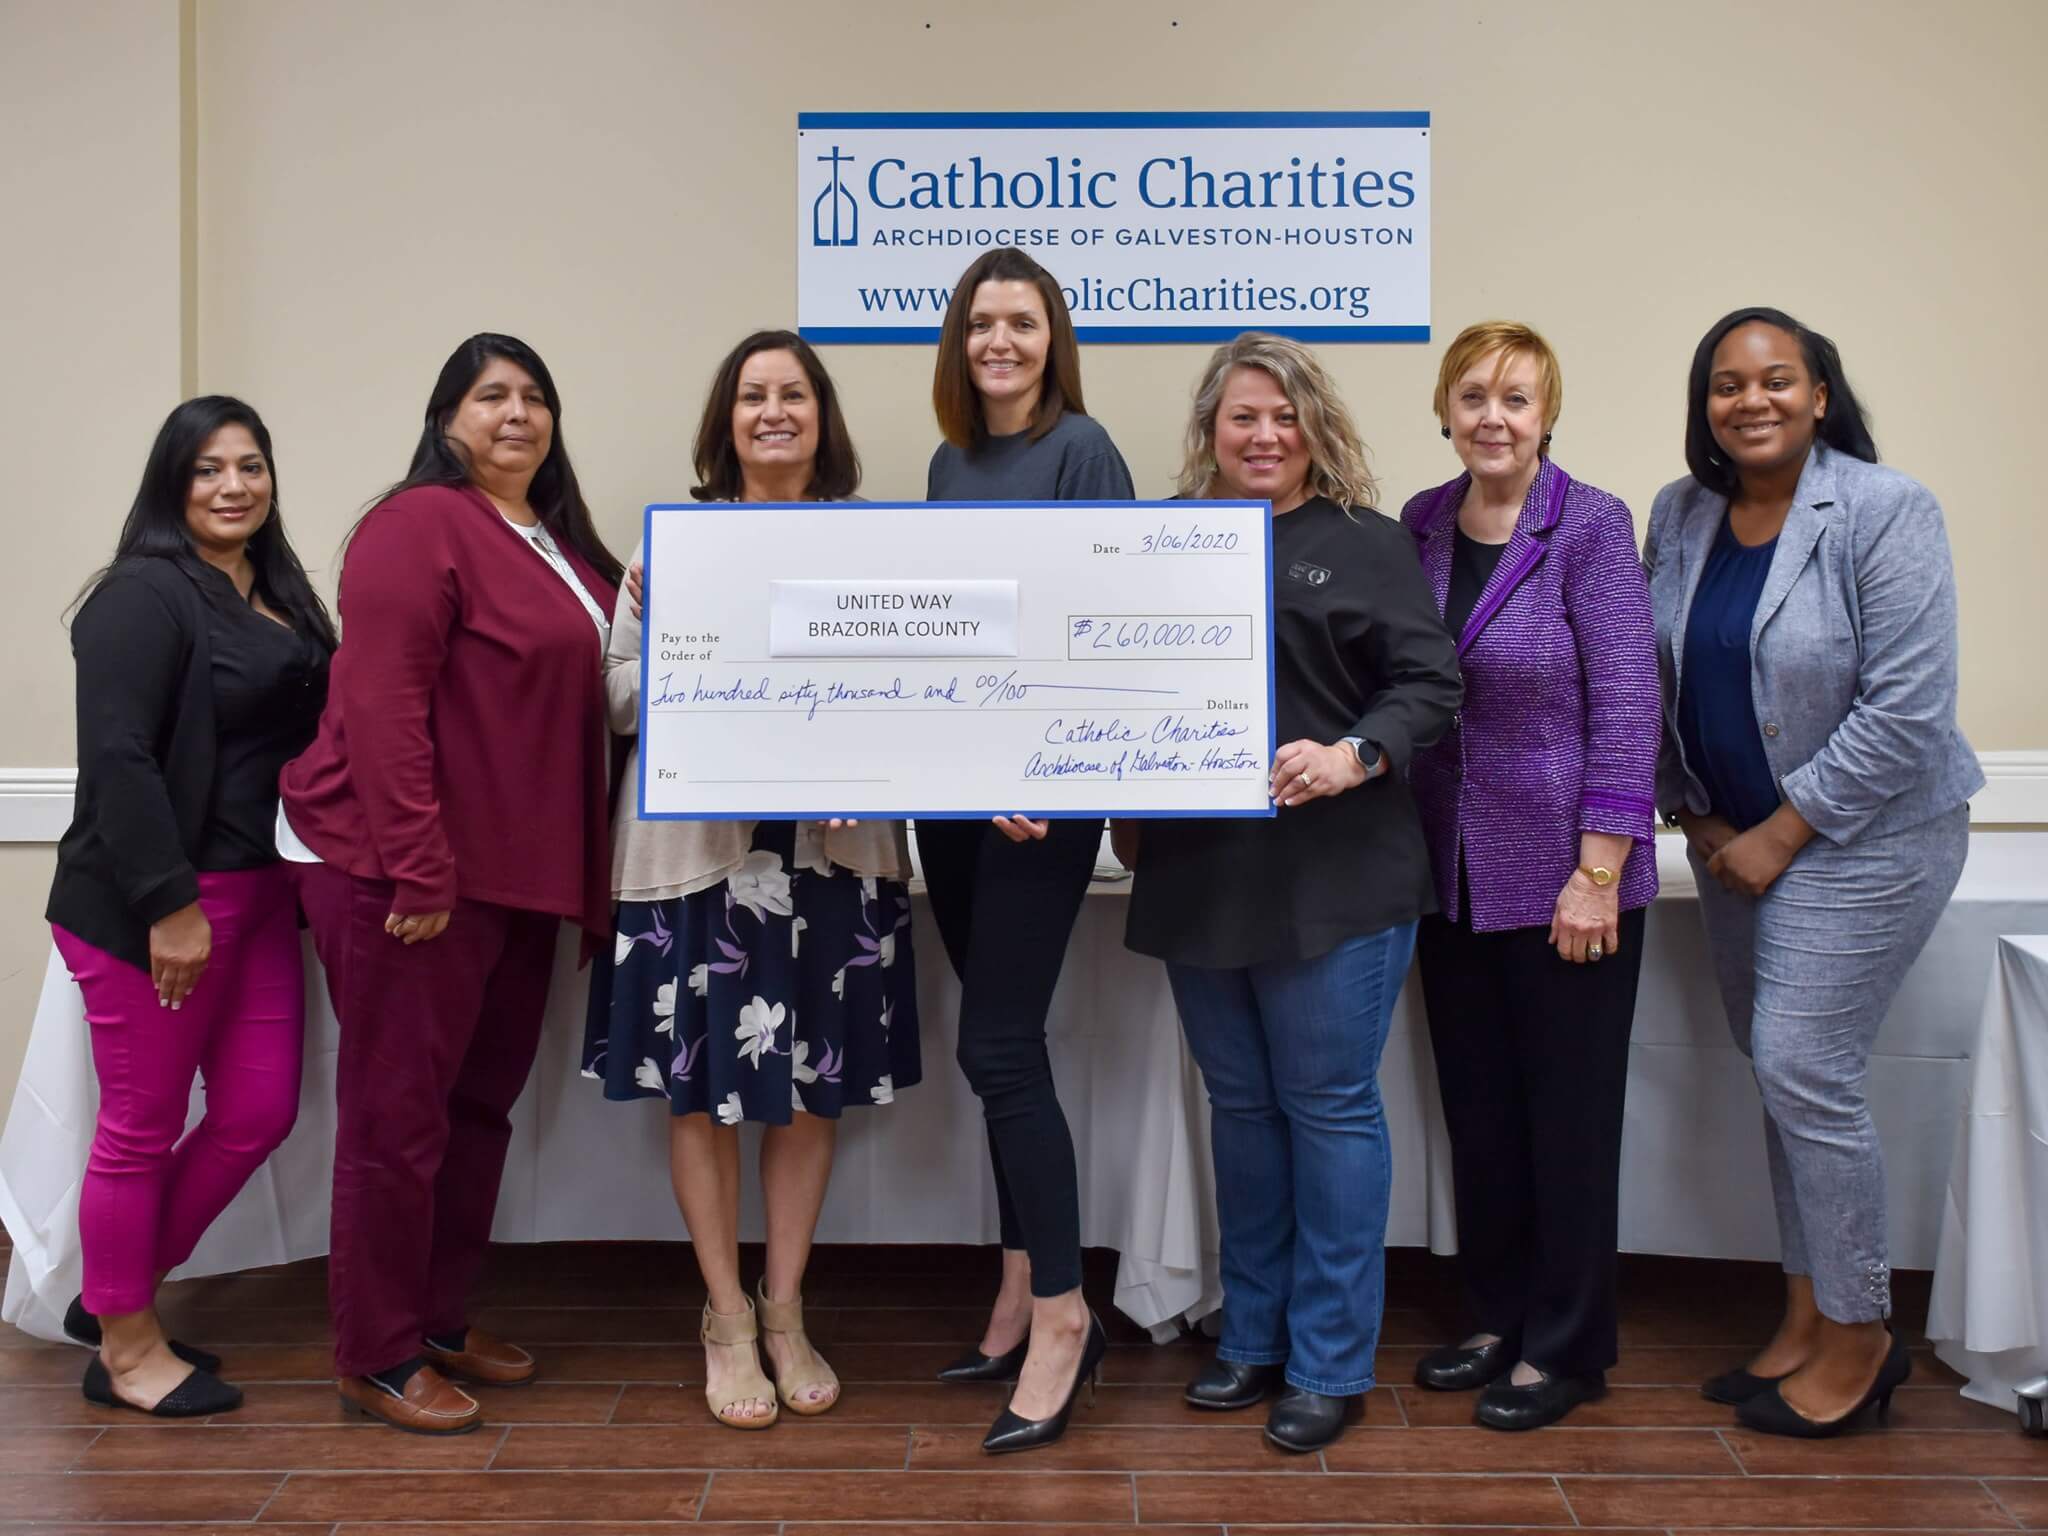 Catholic Charities presented a check to United Way Brazoria County and Brazoria County Long Term Recovery Committee.